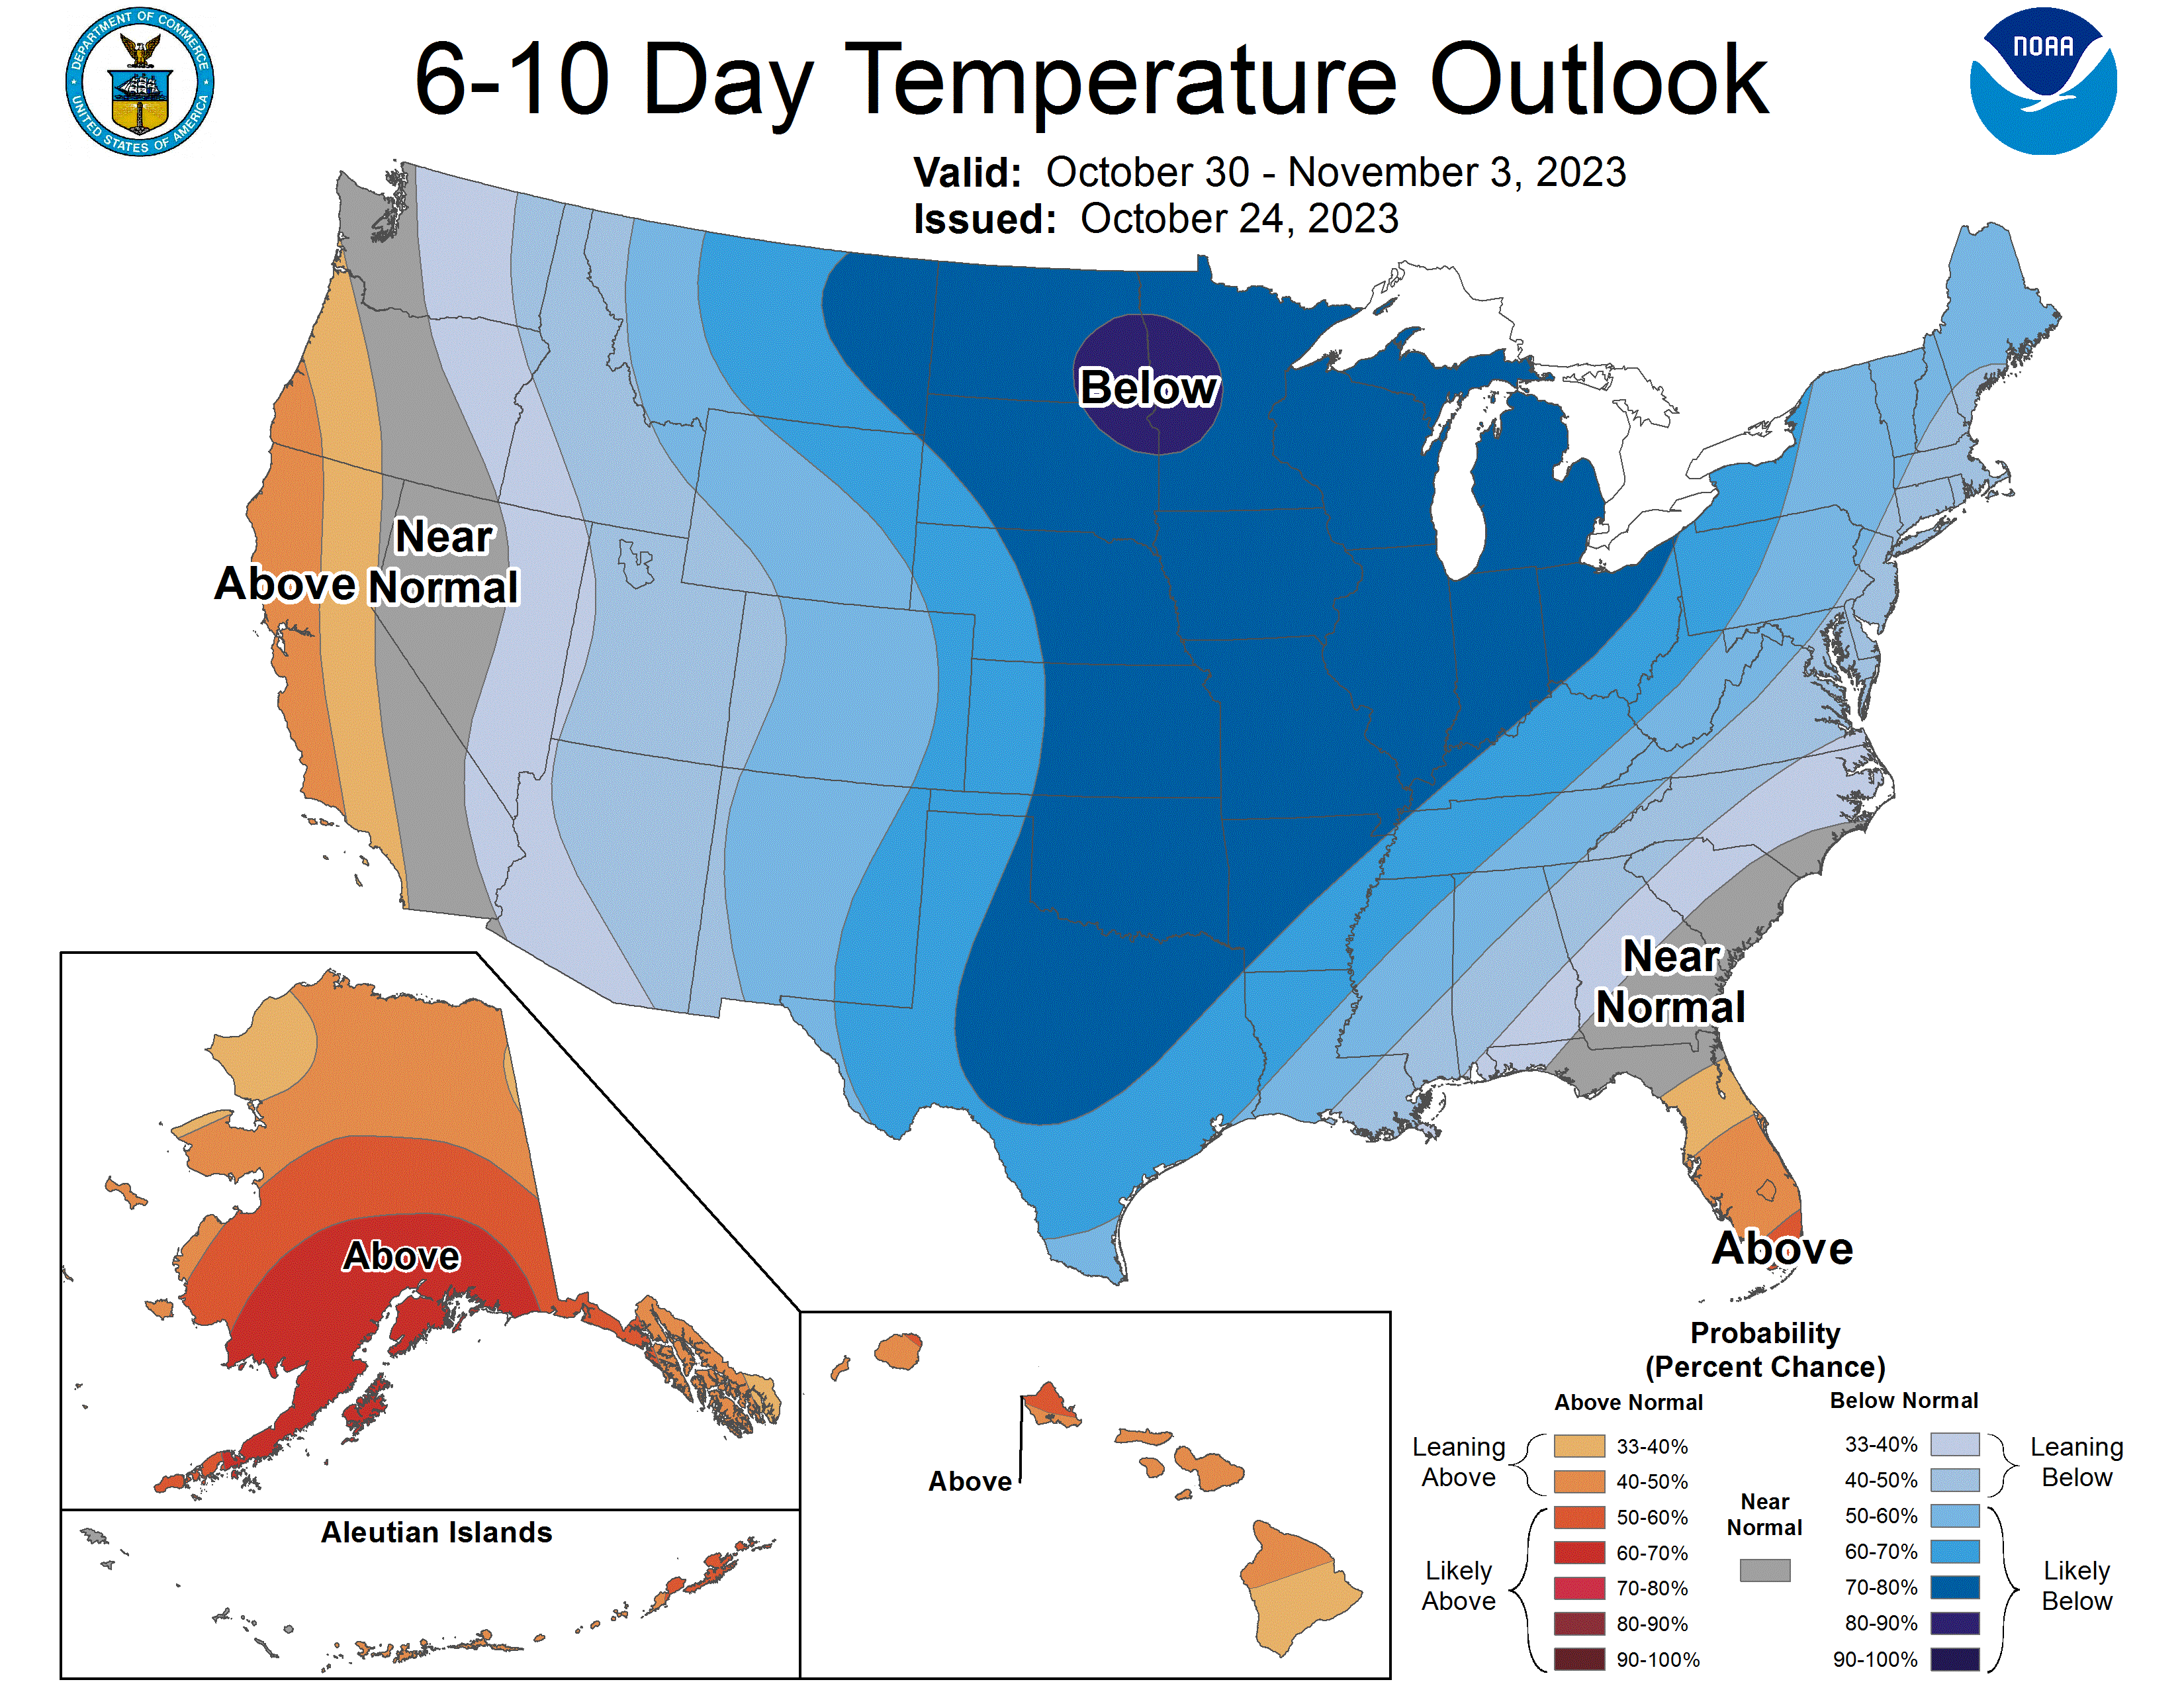 October 30-November 3, 2023 – 6-10 Day Temperature Outlook